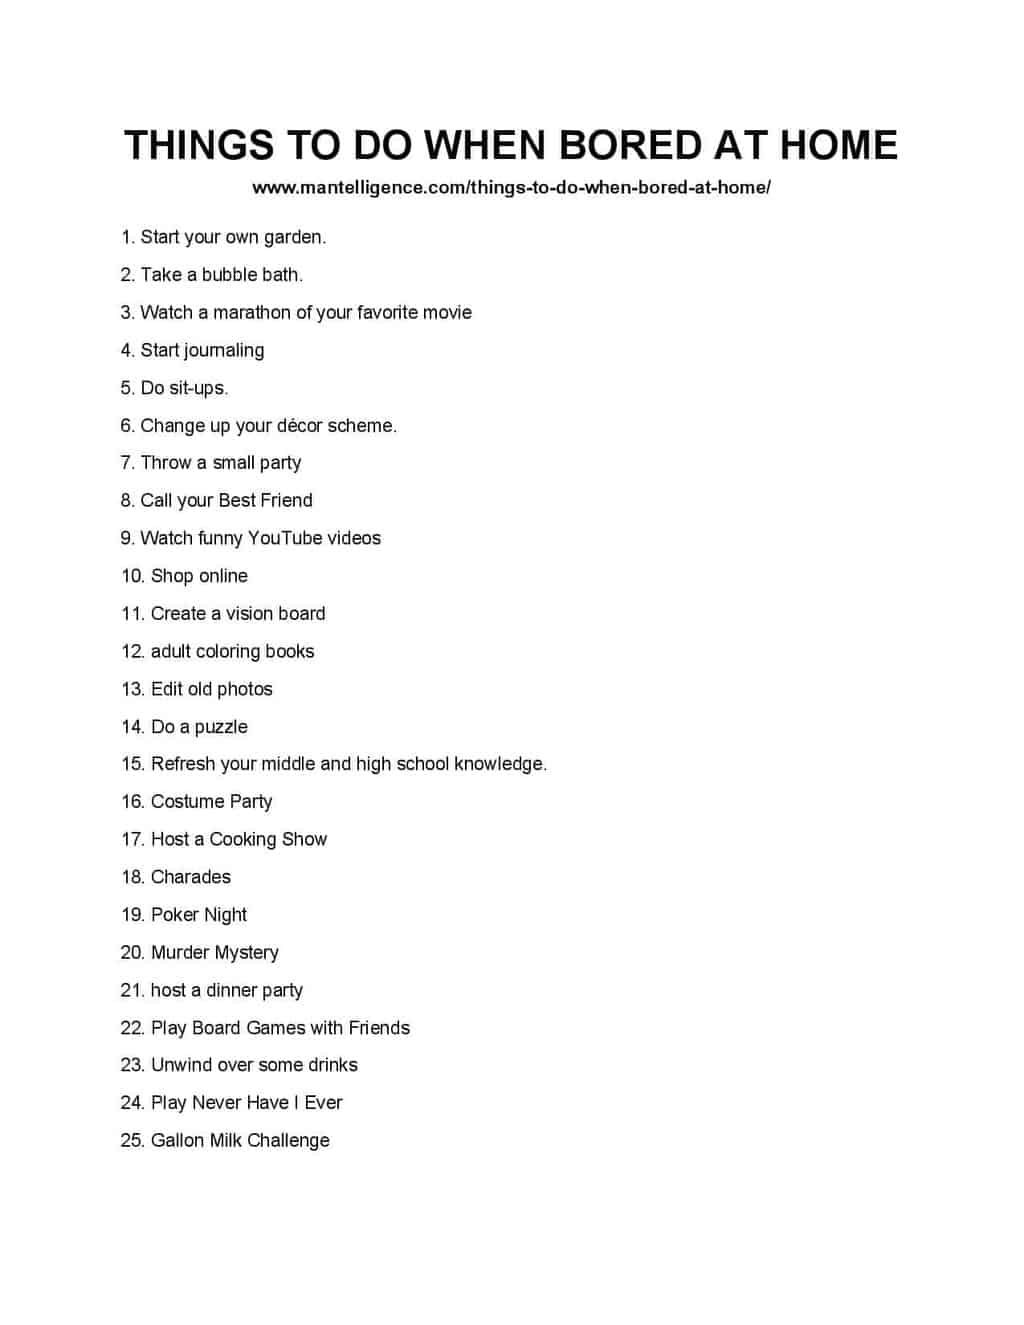 83 Things To Do When Bored At Home - Fun activities to do!